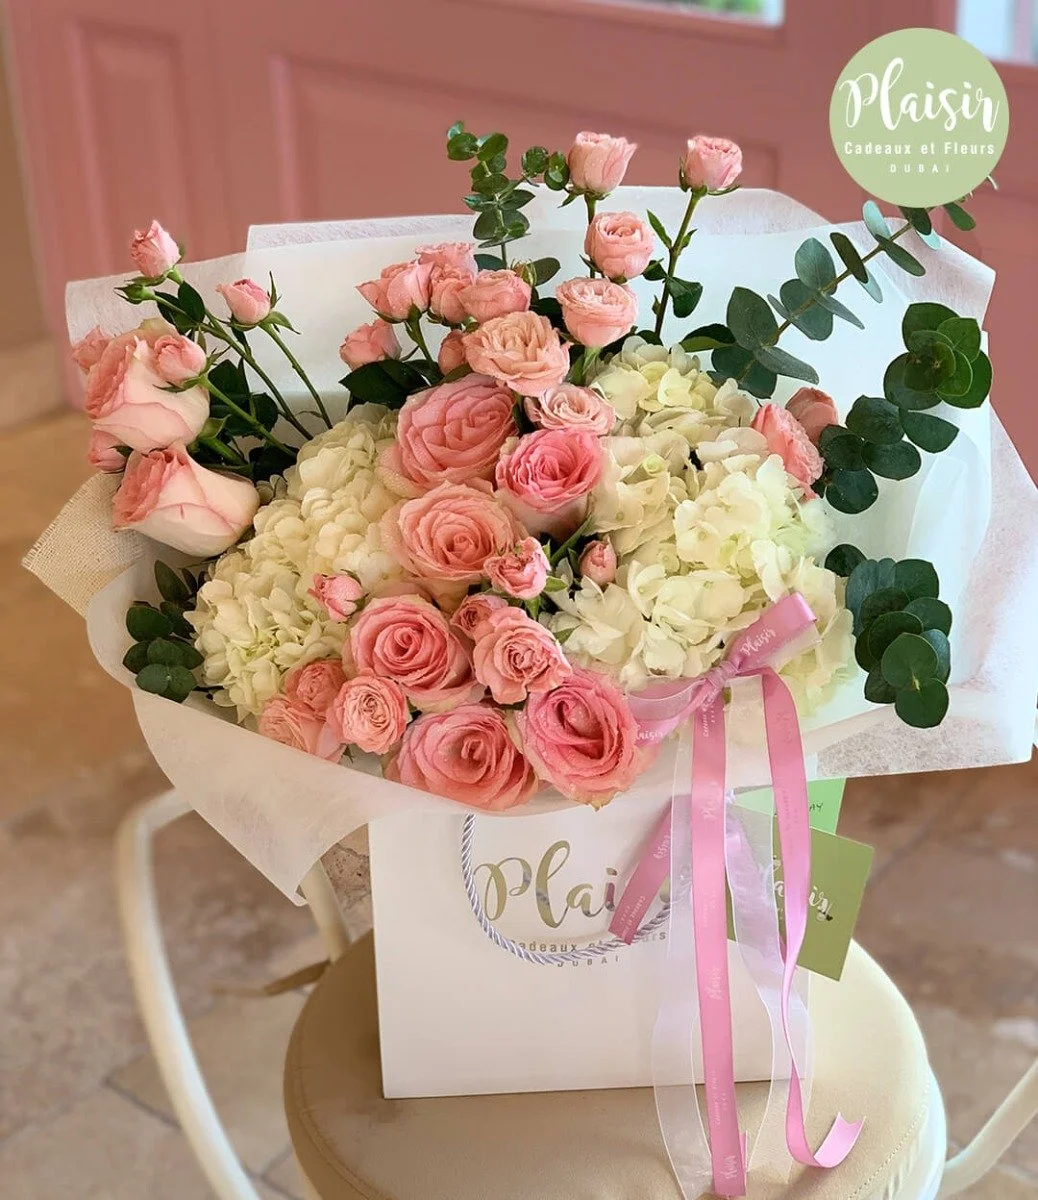 Pink & White Hand-tied Bouquet By Plaisir